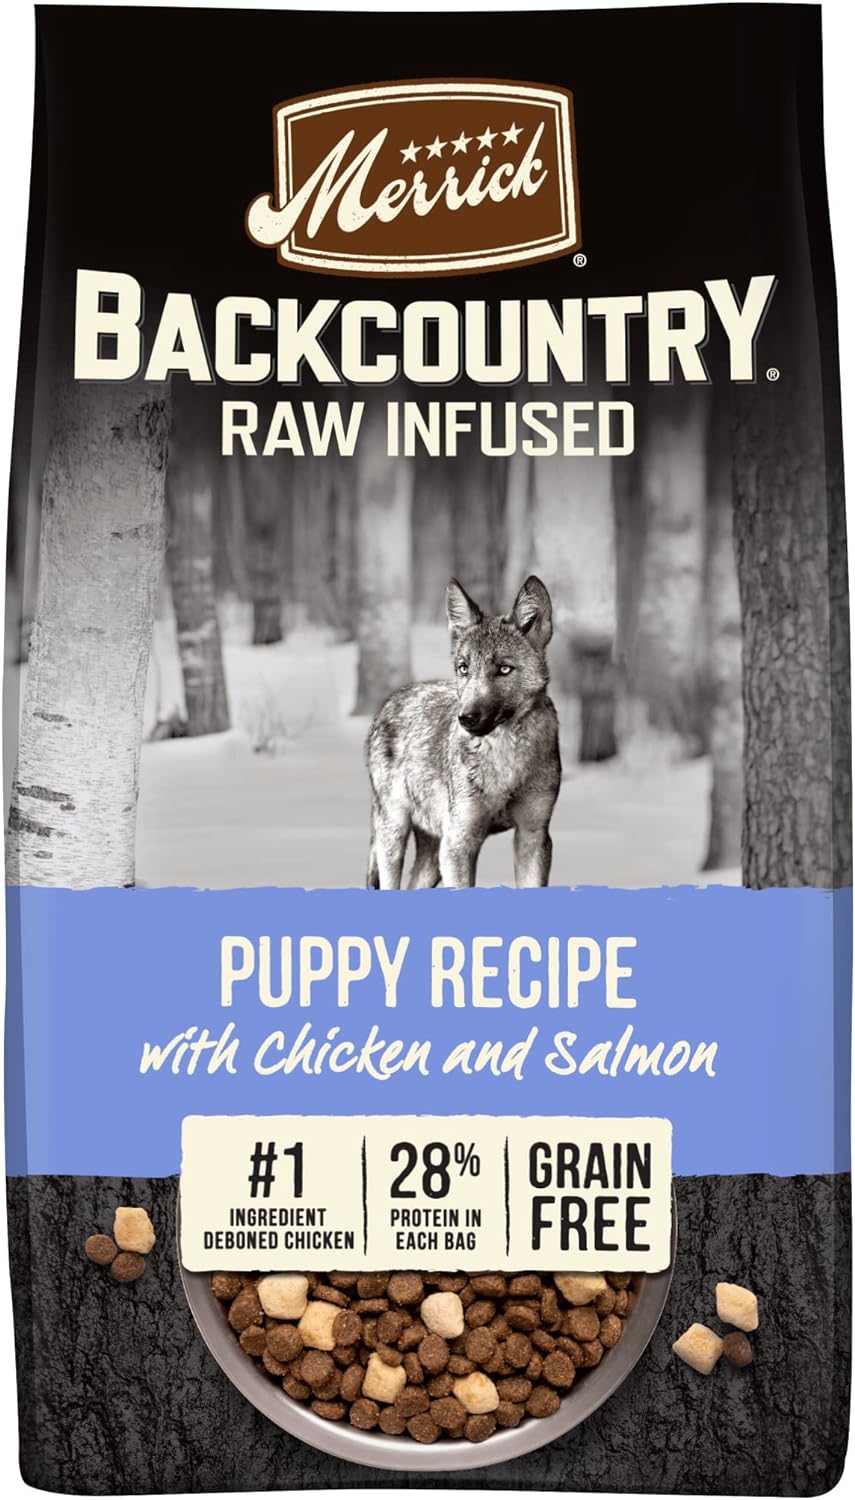 Merrick Backcountry Raw Infused Puppy Recipe Dry Dog Food – Gallery Image 1